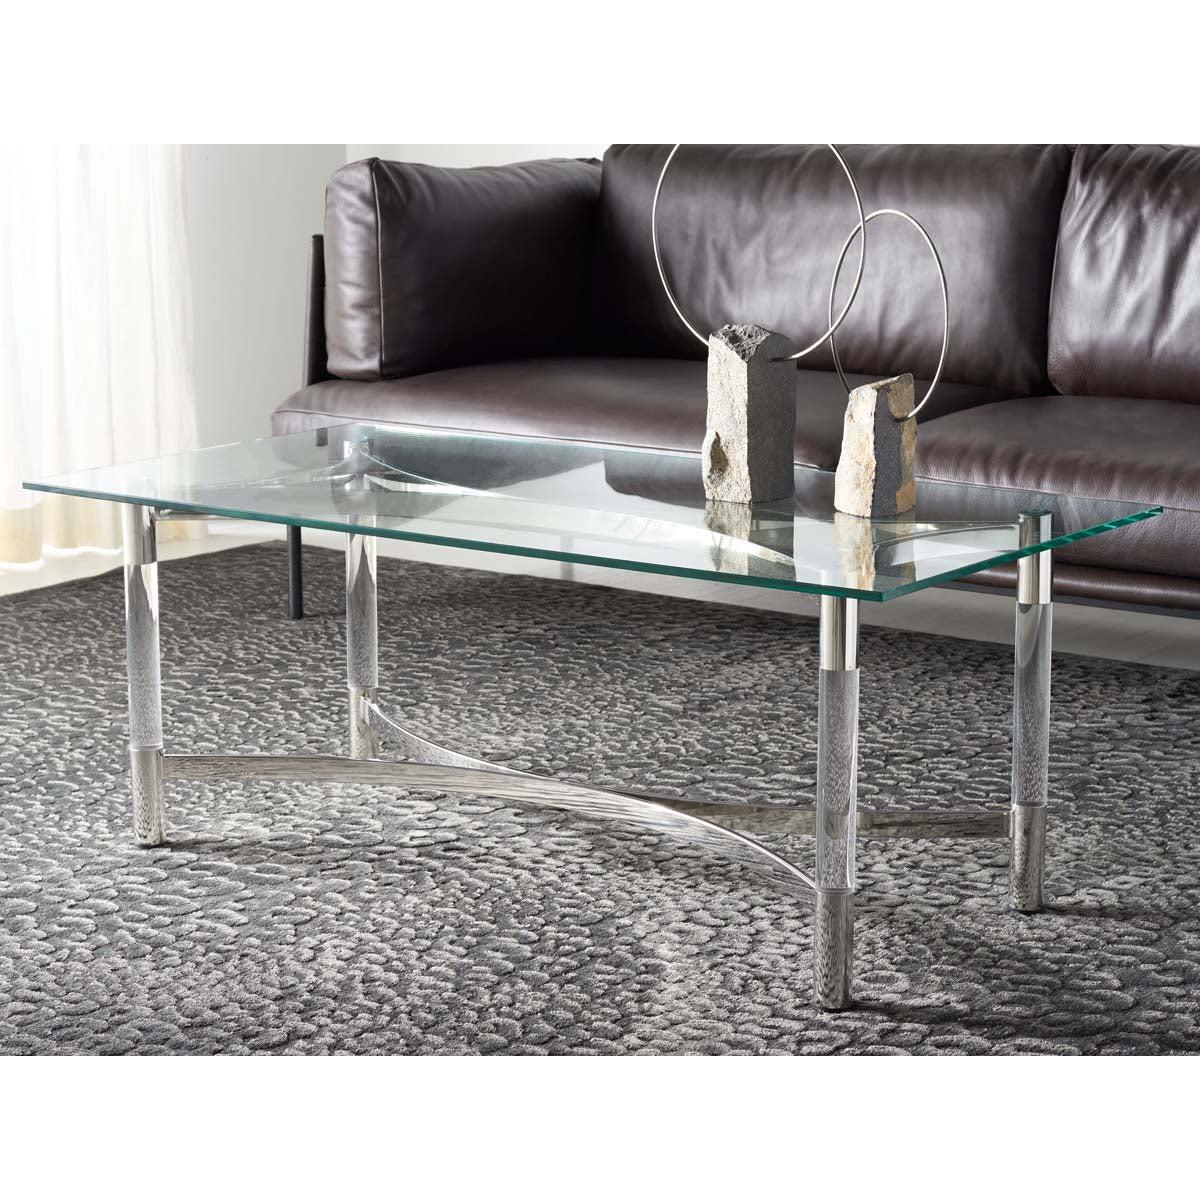 Safavieh Couture Letty Acrylic Coffee Table